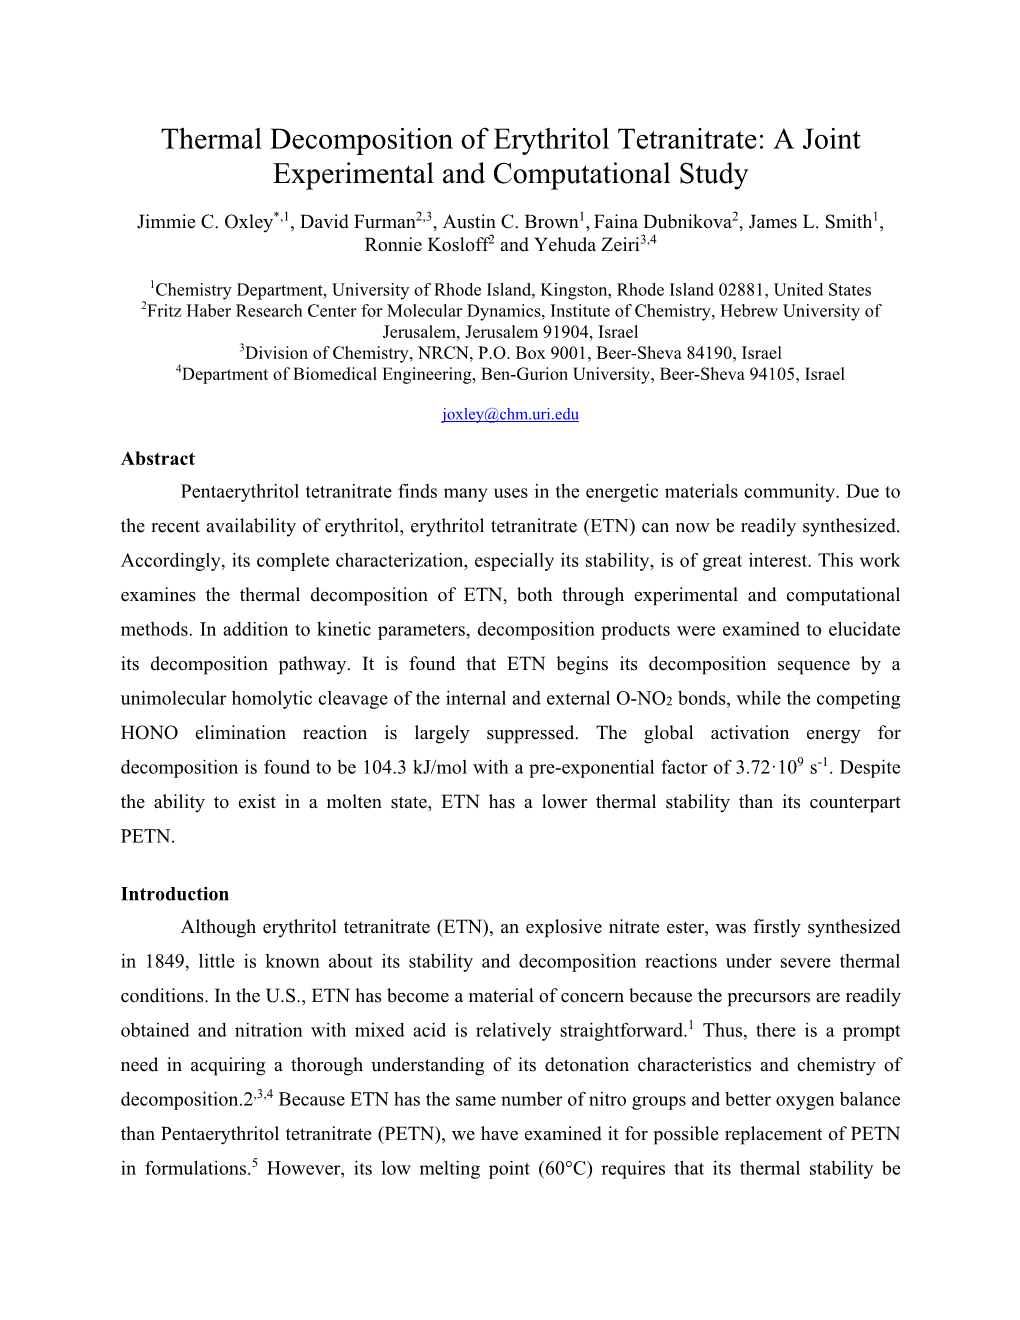 Thermal Decomposition of Erythritol Tetranitrate: a Joint Experimental and Computational Study